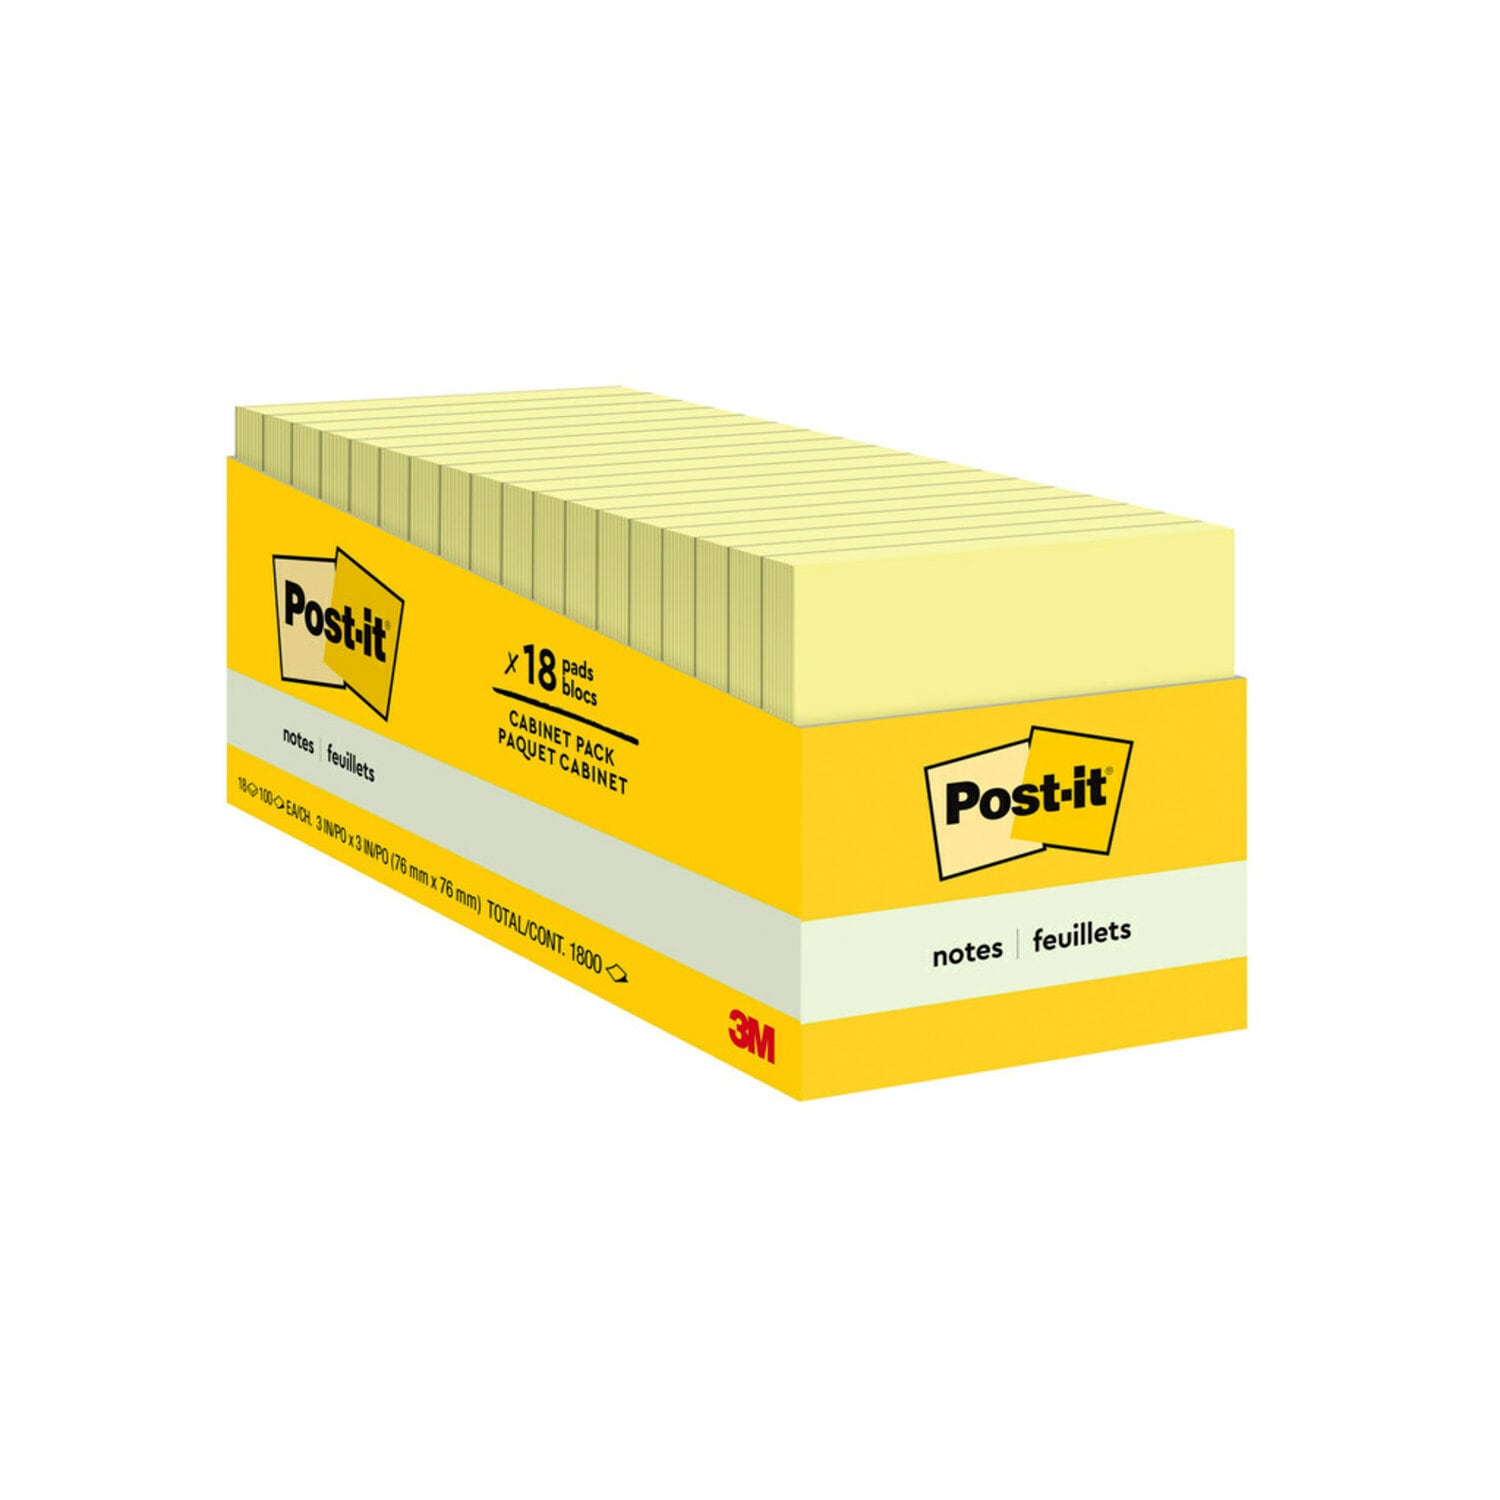 7100263102 - Post-it Notes 654-18CP, 3 in x 3 in (76 mm x 76 mm)